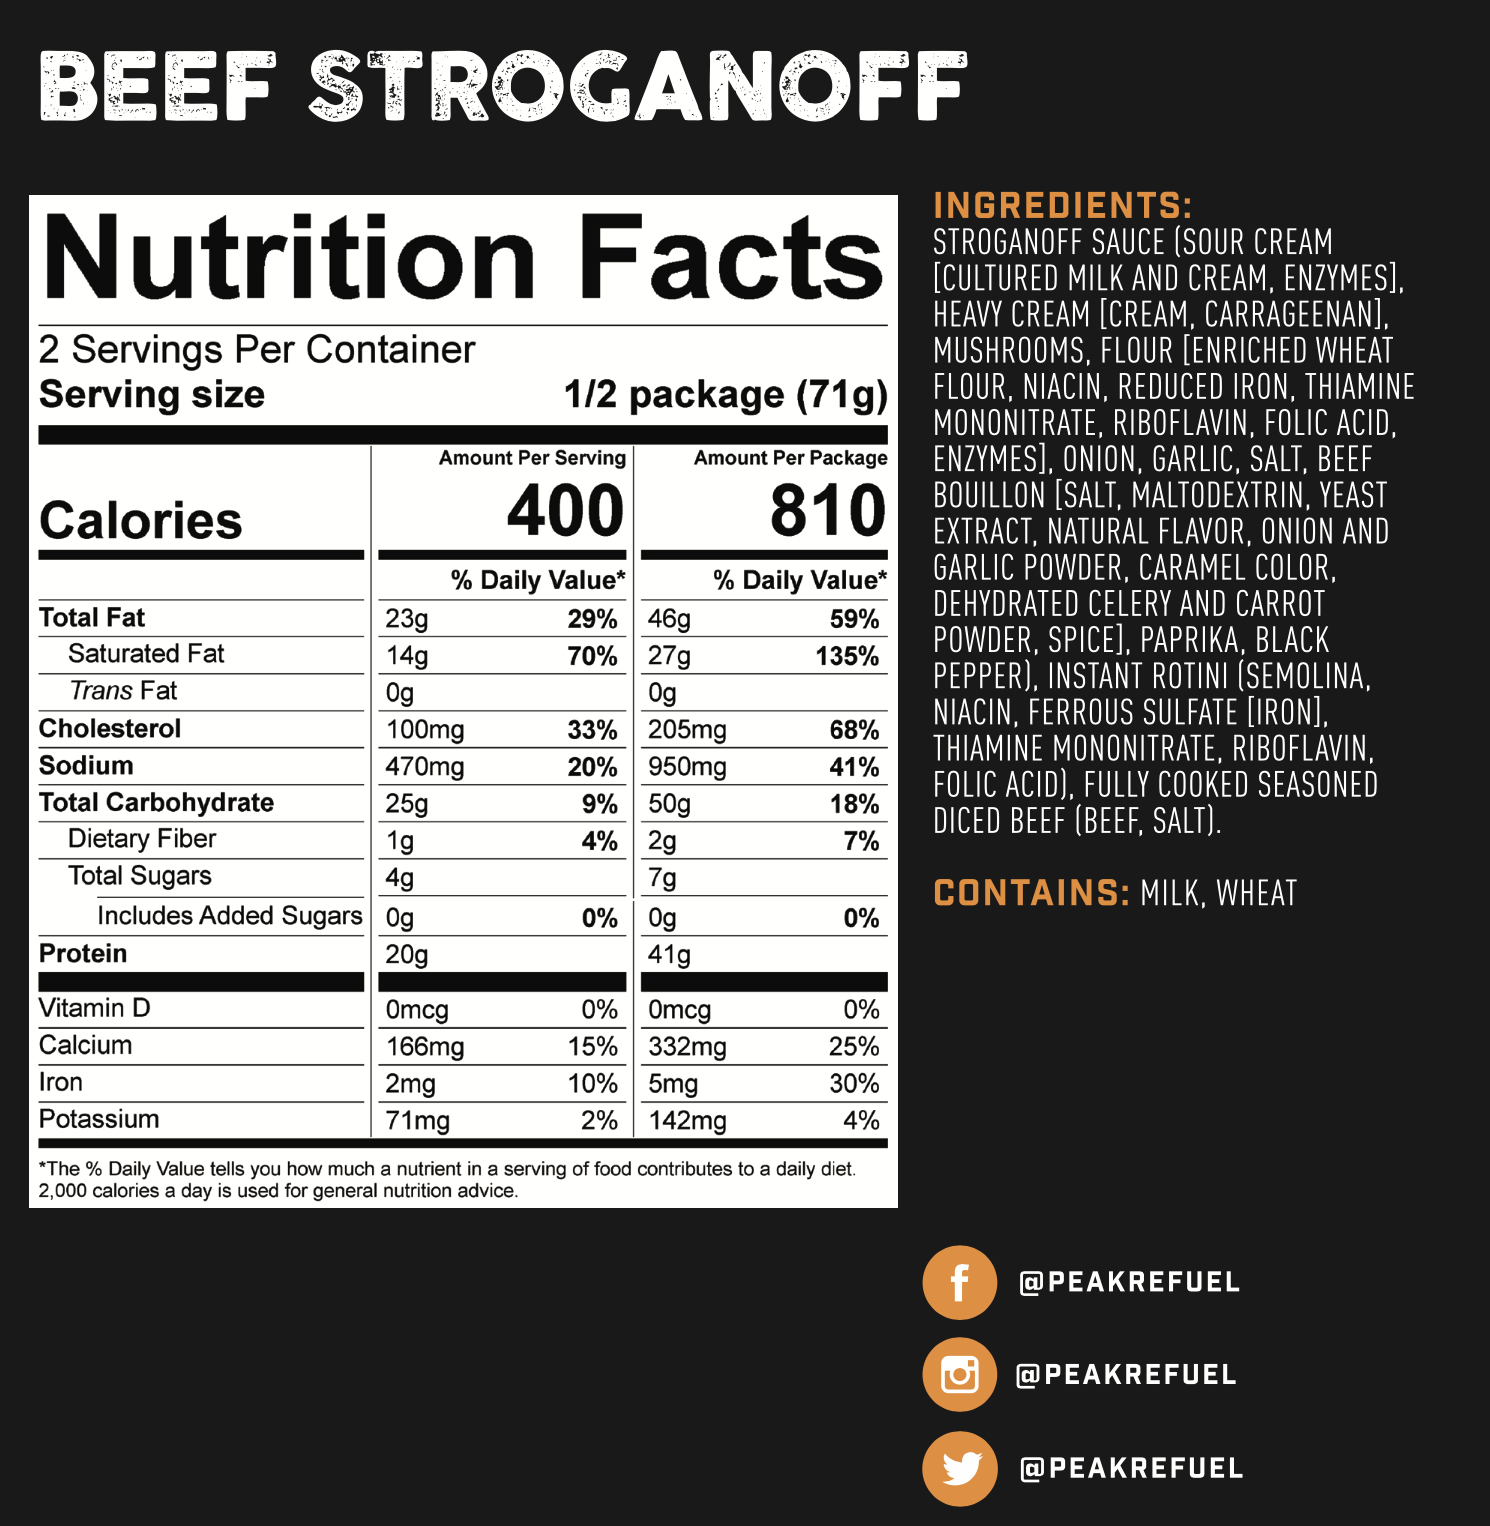 A black and white nutrition label with text on a black background, including a nutrition facts label, a letter "F" in a circle, and a camera logo.